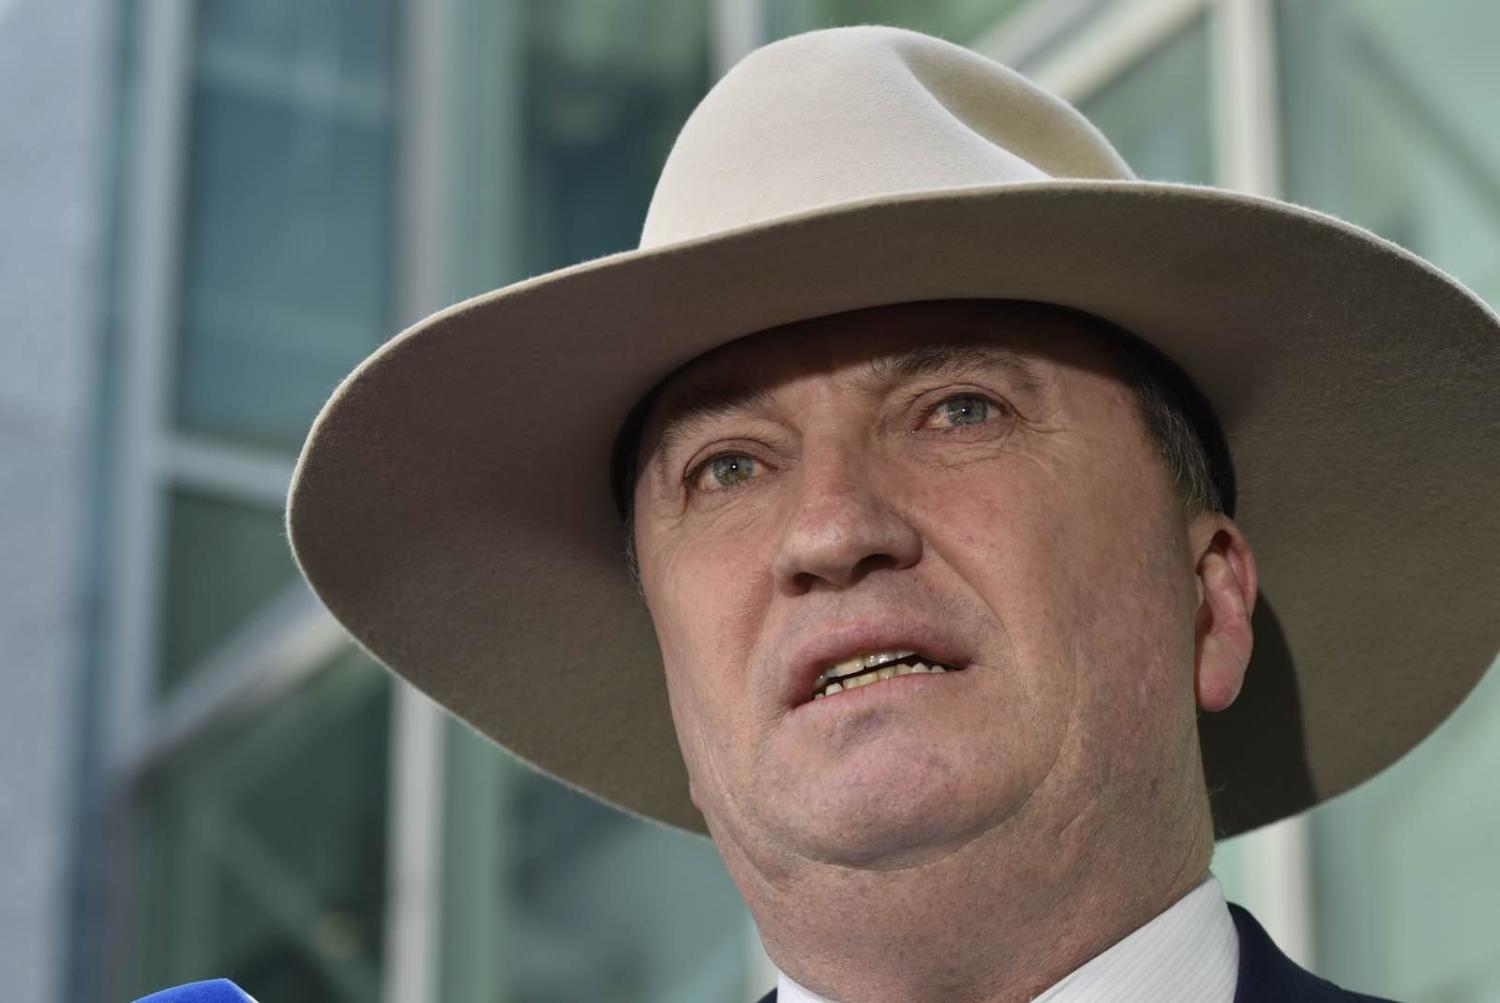 Nationals MP and former deputy prime minister Barnaby Joyce (Photo: Michael Masters/Getty Images)